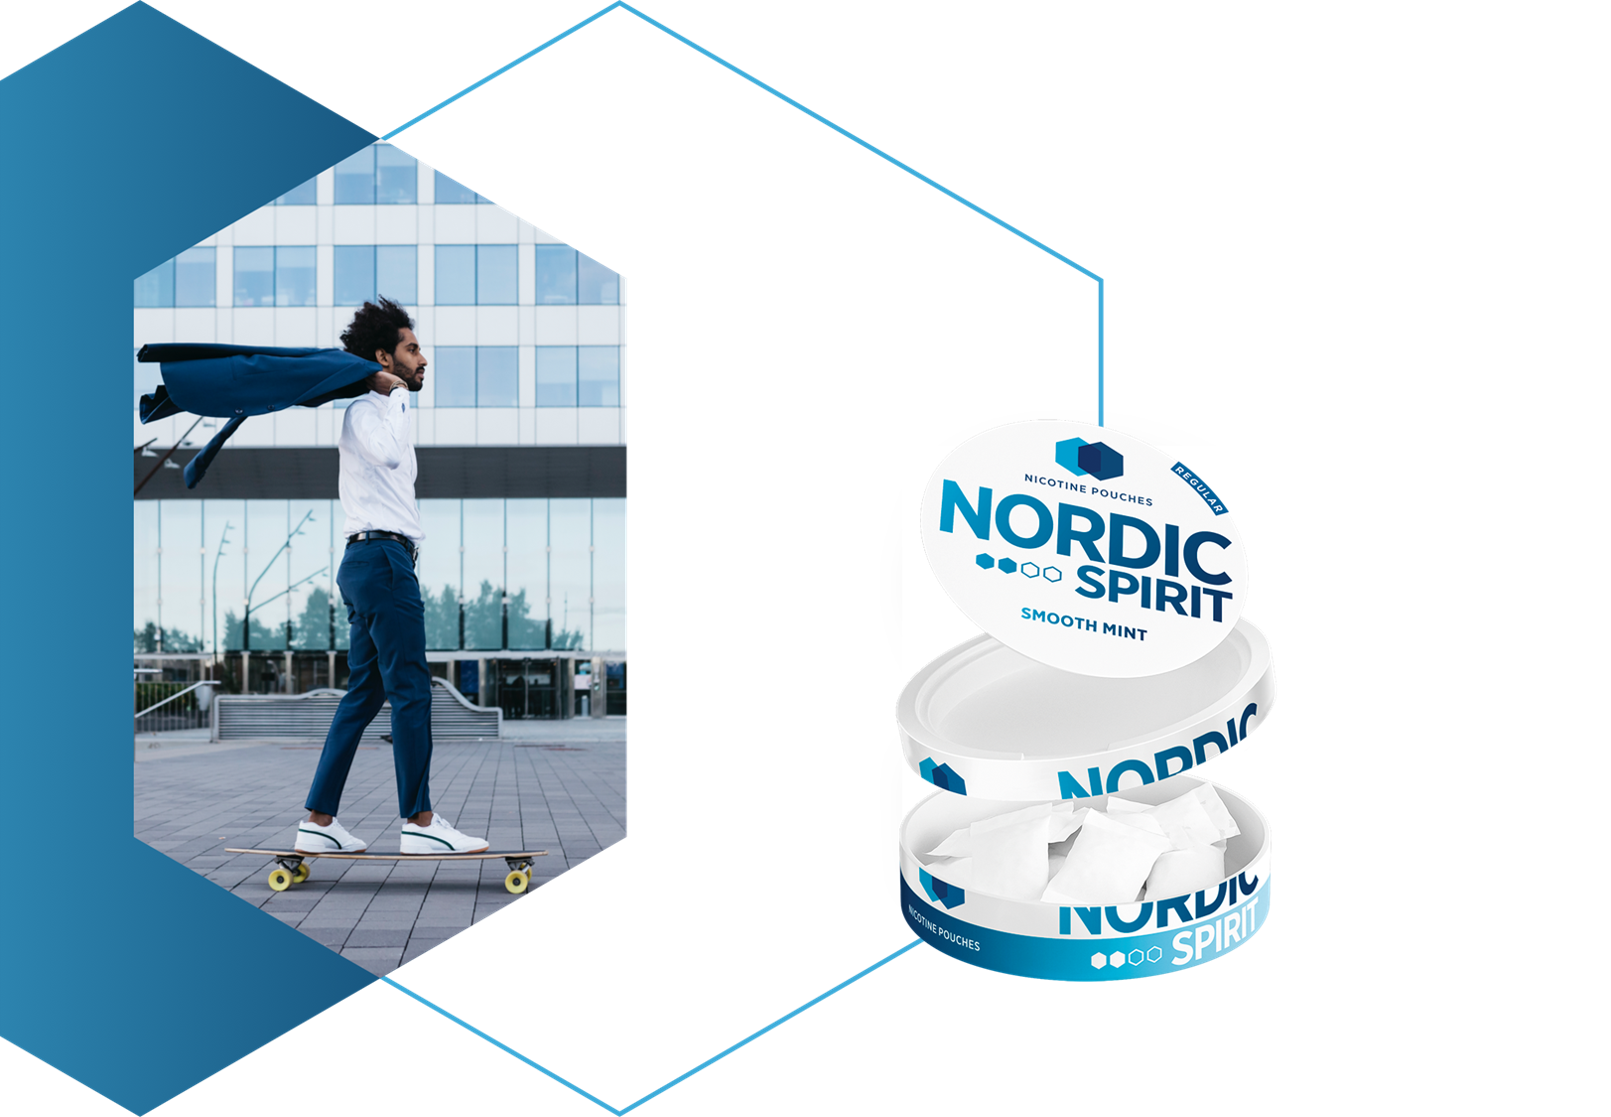 Man skateboarding in formal attire along side a can of Nordic Spirit Smooth Mint Nicotine Pouches.